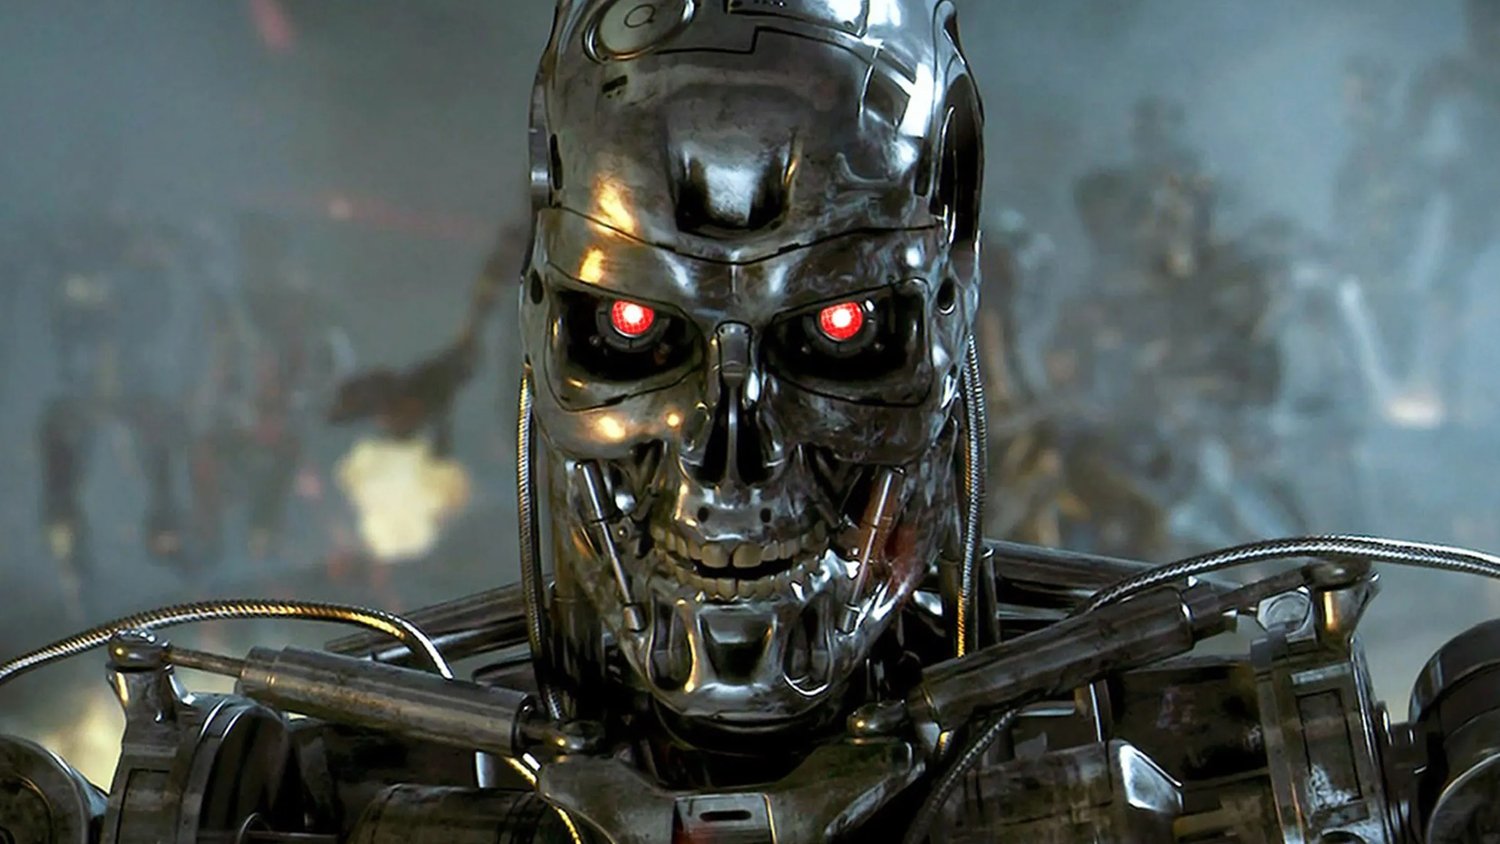 James Cameron Is Writing a New TERMINATOR Movie, but Is Waiting to See How AI Shakes Out Before Finishing It